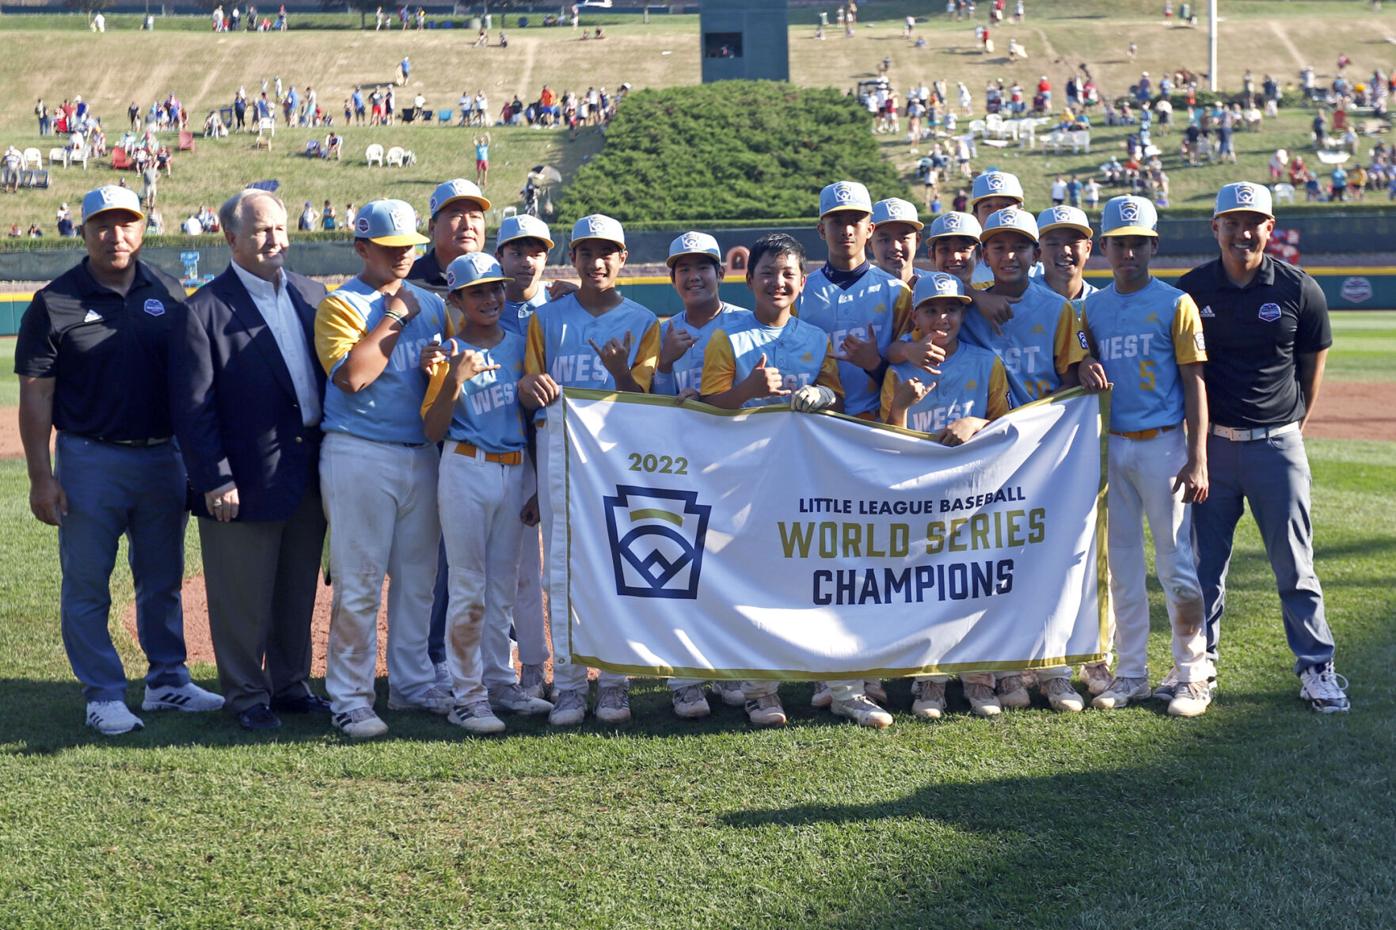 Meet the N.J. kids who could be the next Little League World Series champs  